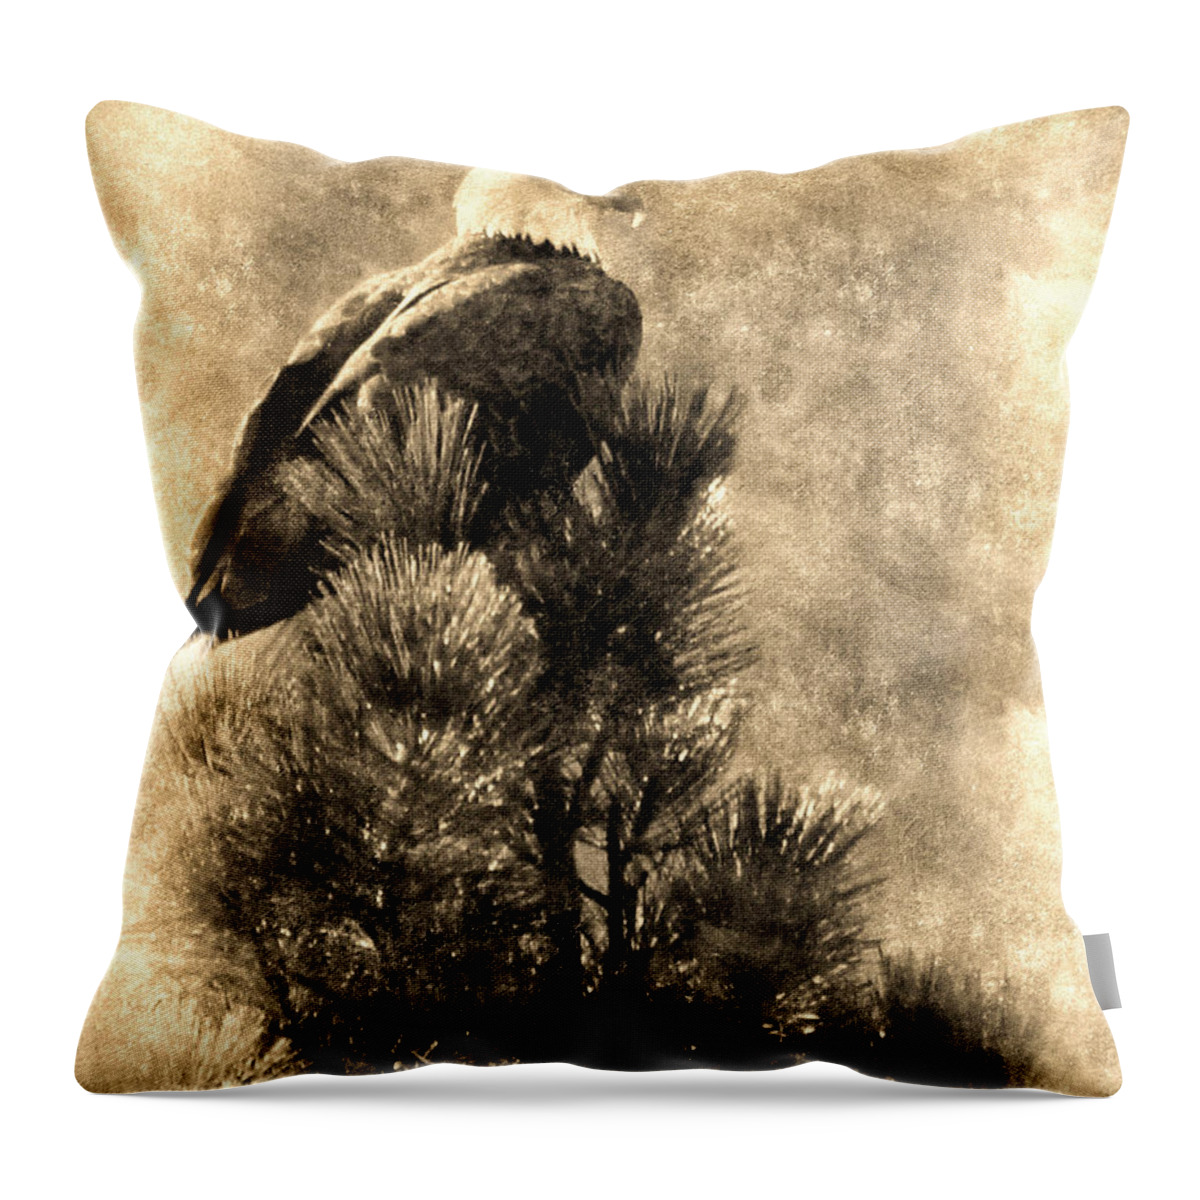 Bald Eagle Throw Pillow featuring the photograph Vintage Bald Eagle by Priscilla Burgers